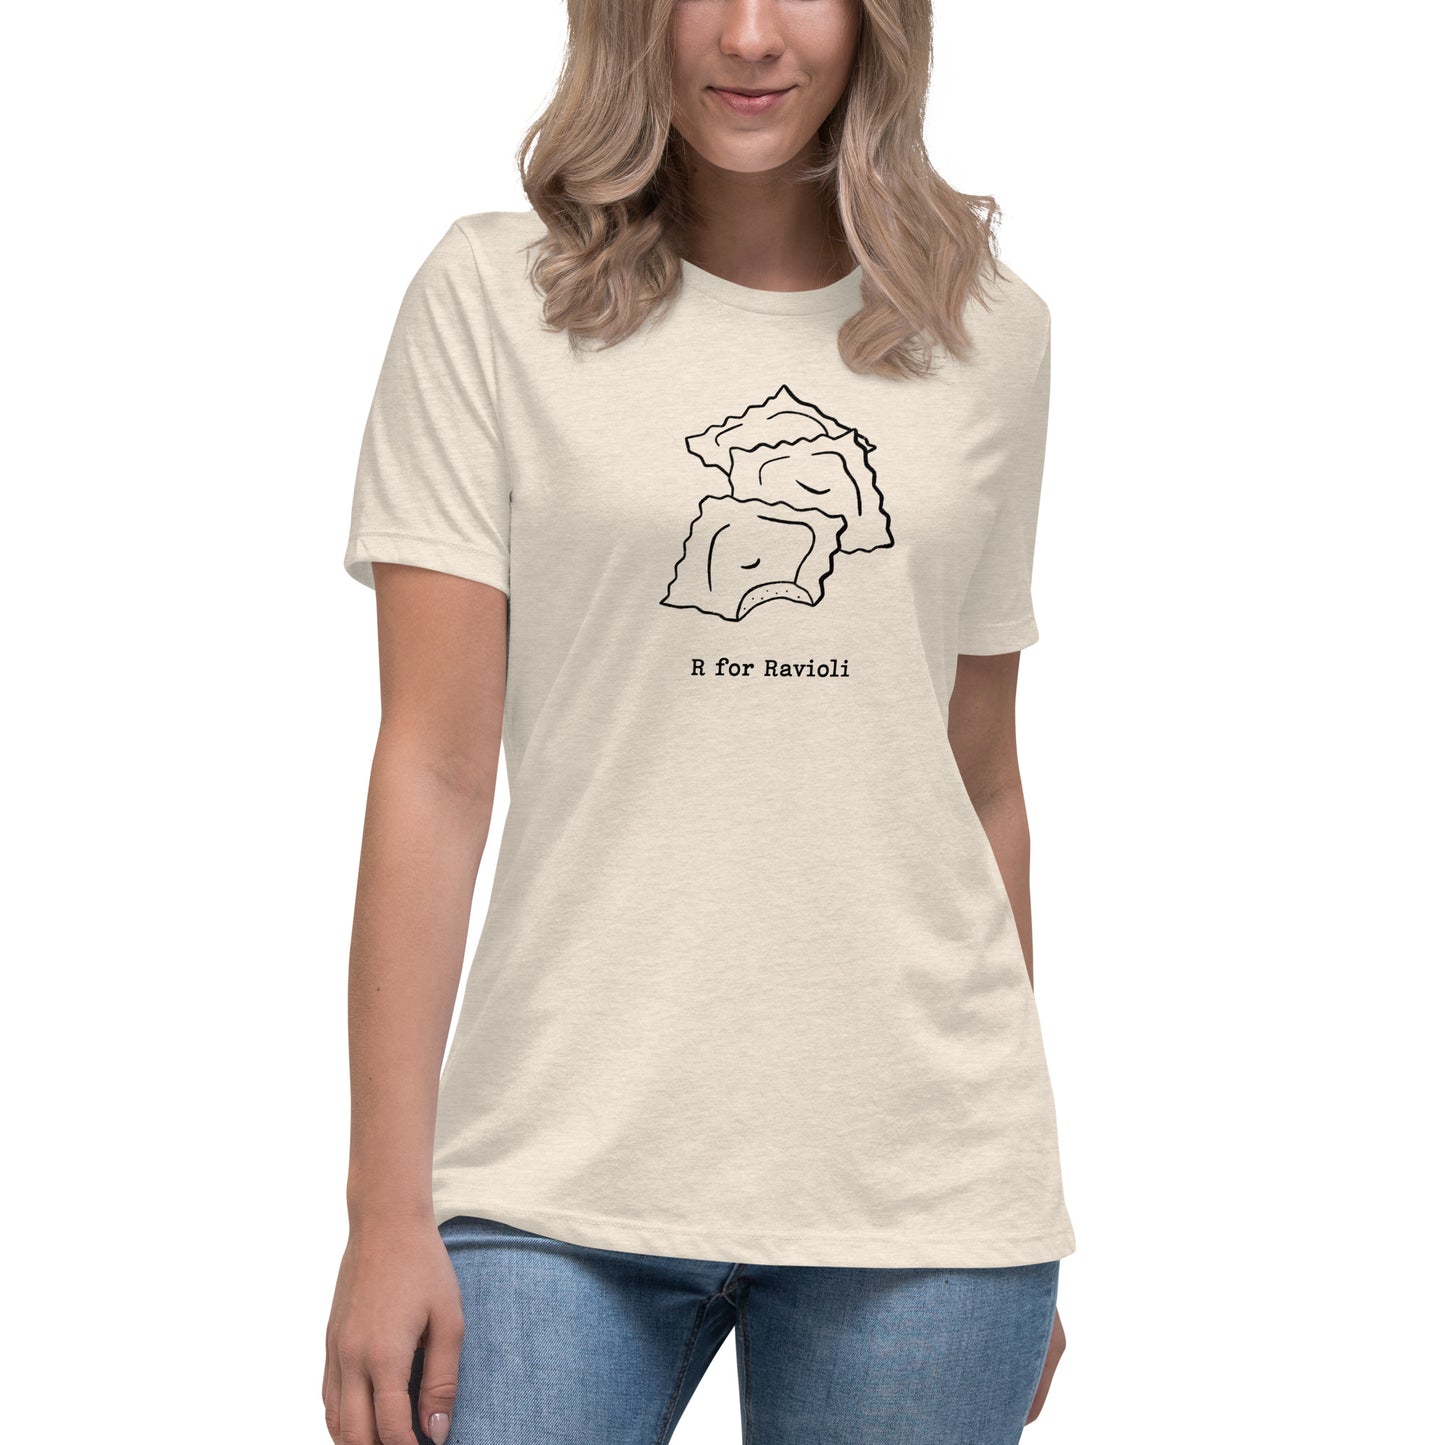 Ravioli on a Women's Relaxed T-Shirt